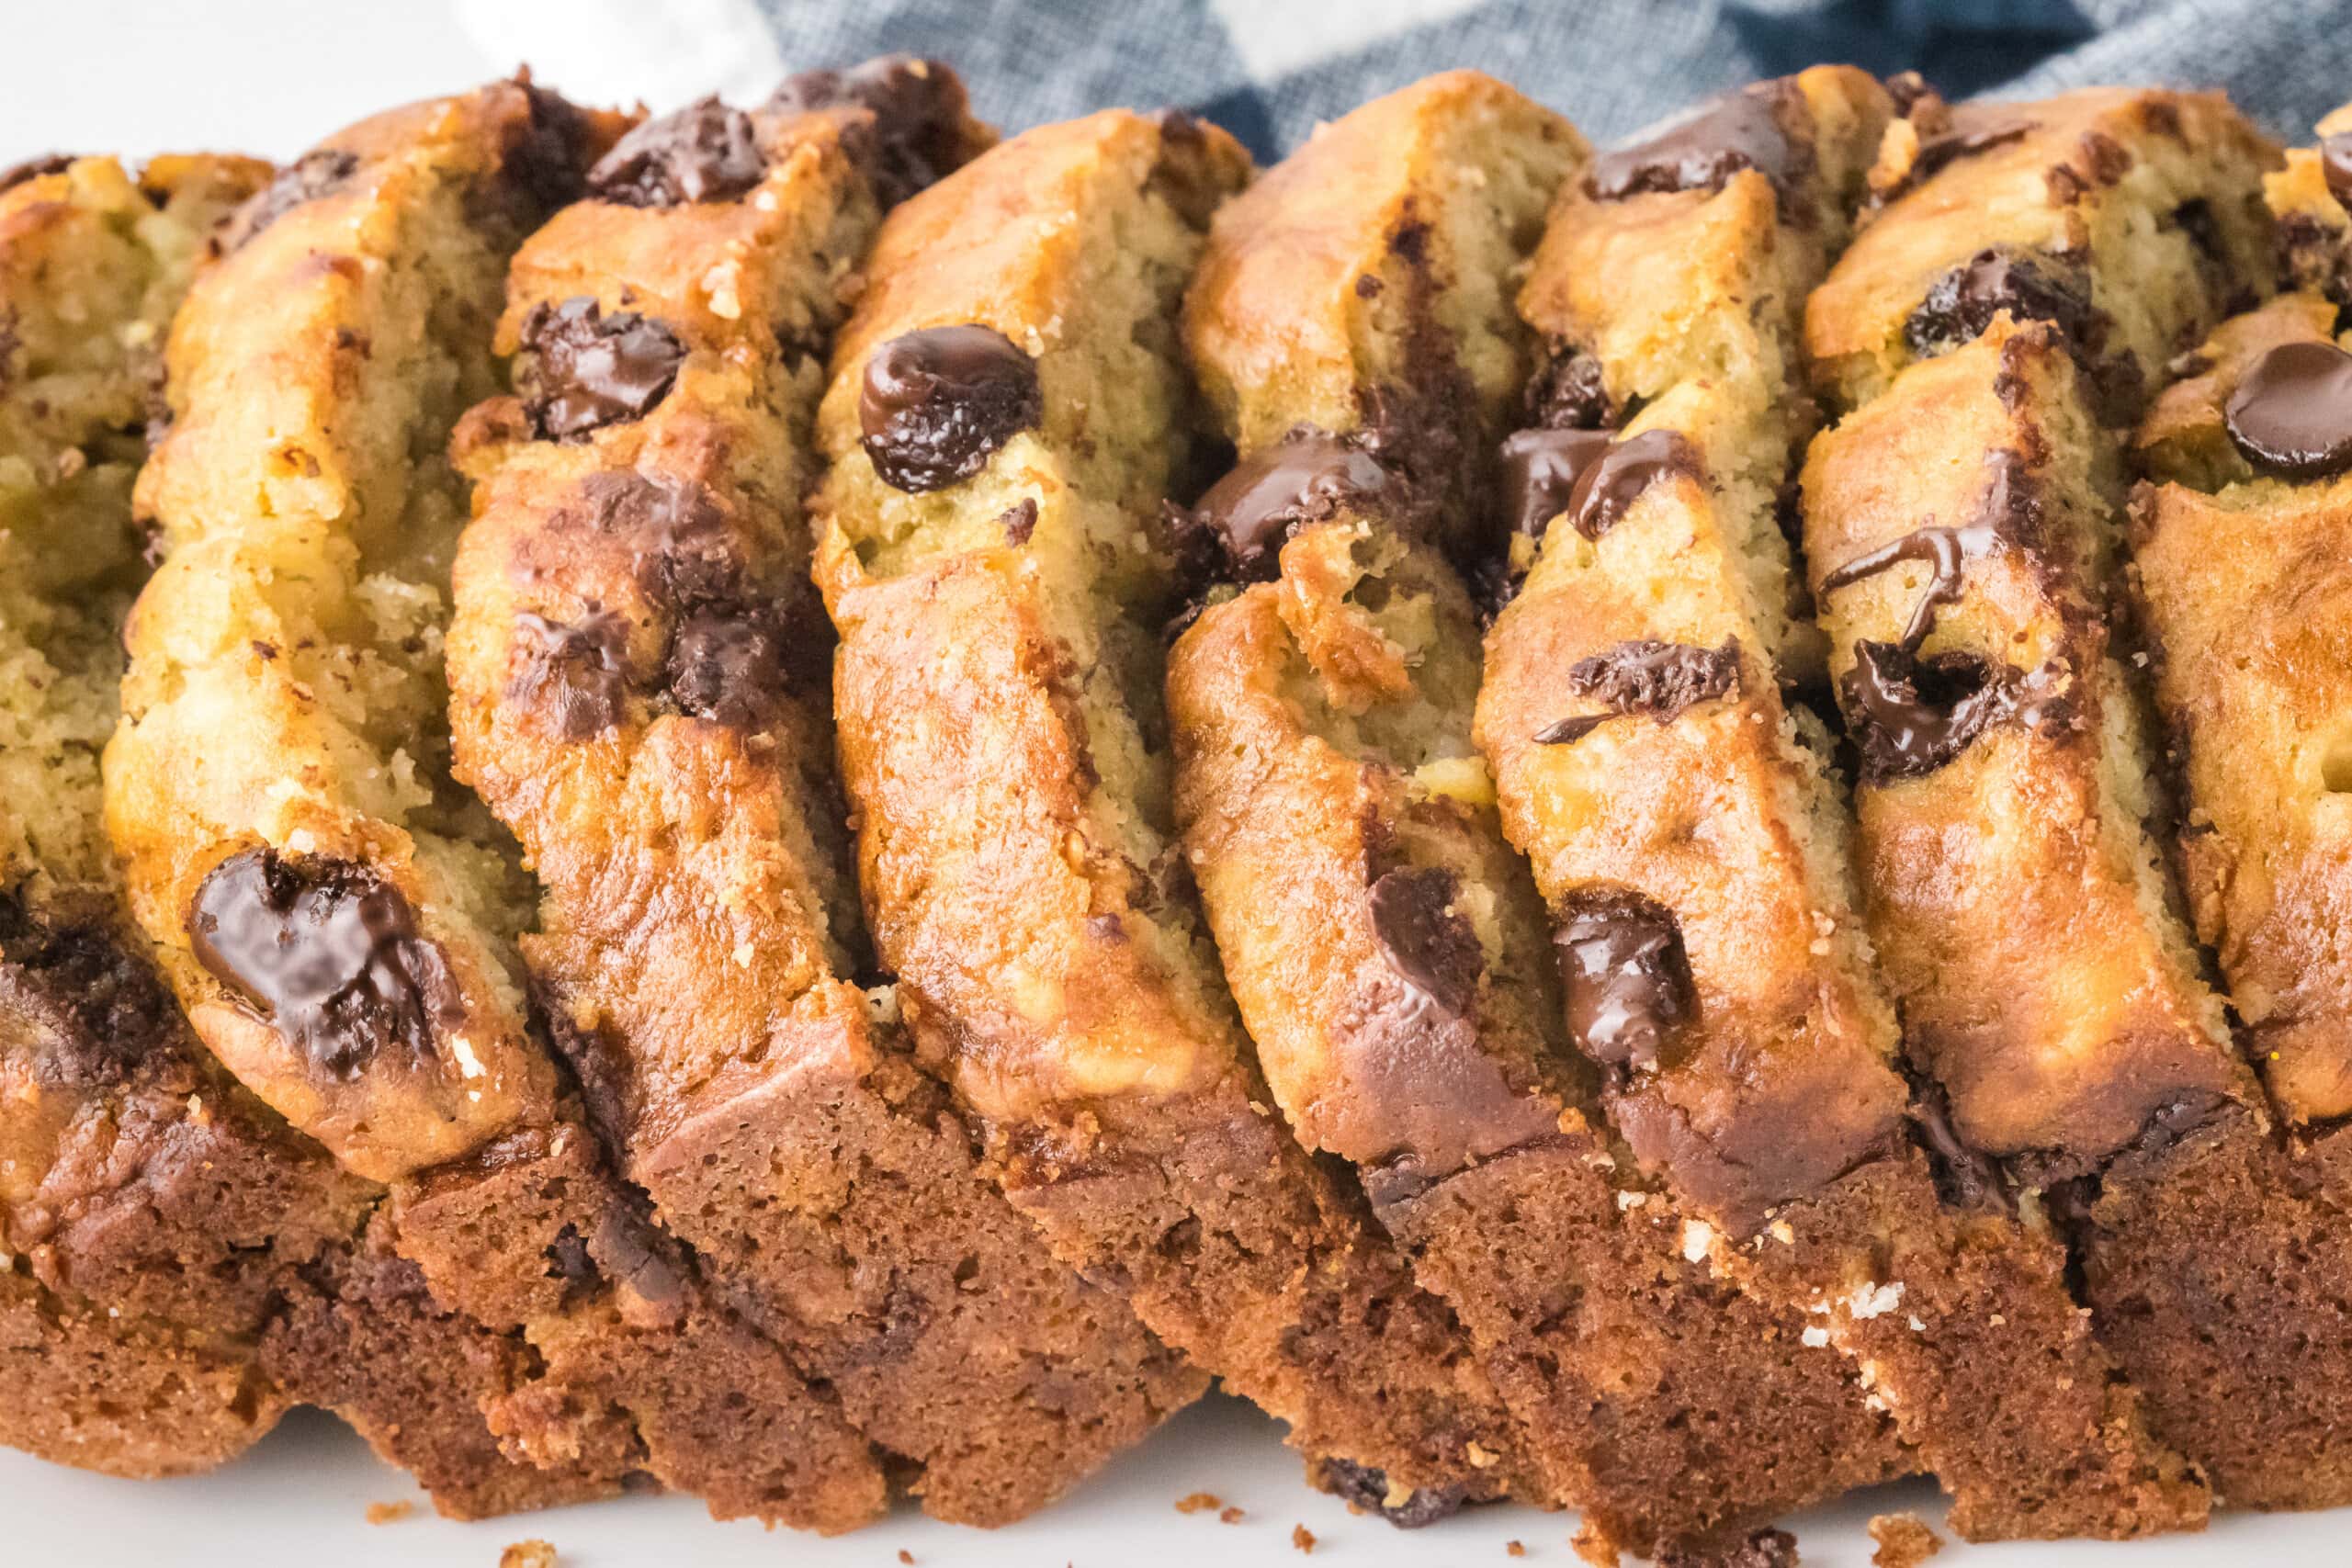 Chocolate Chip Banana Bread cut into slices.